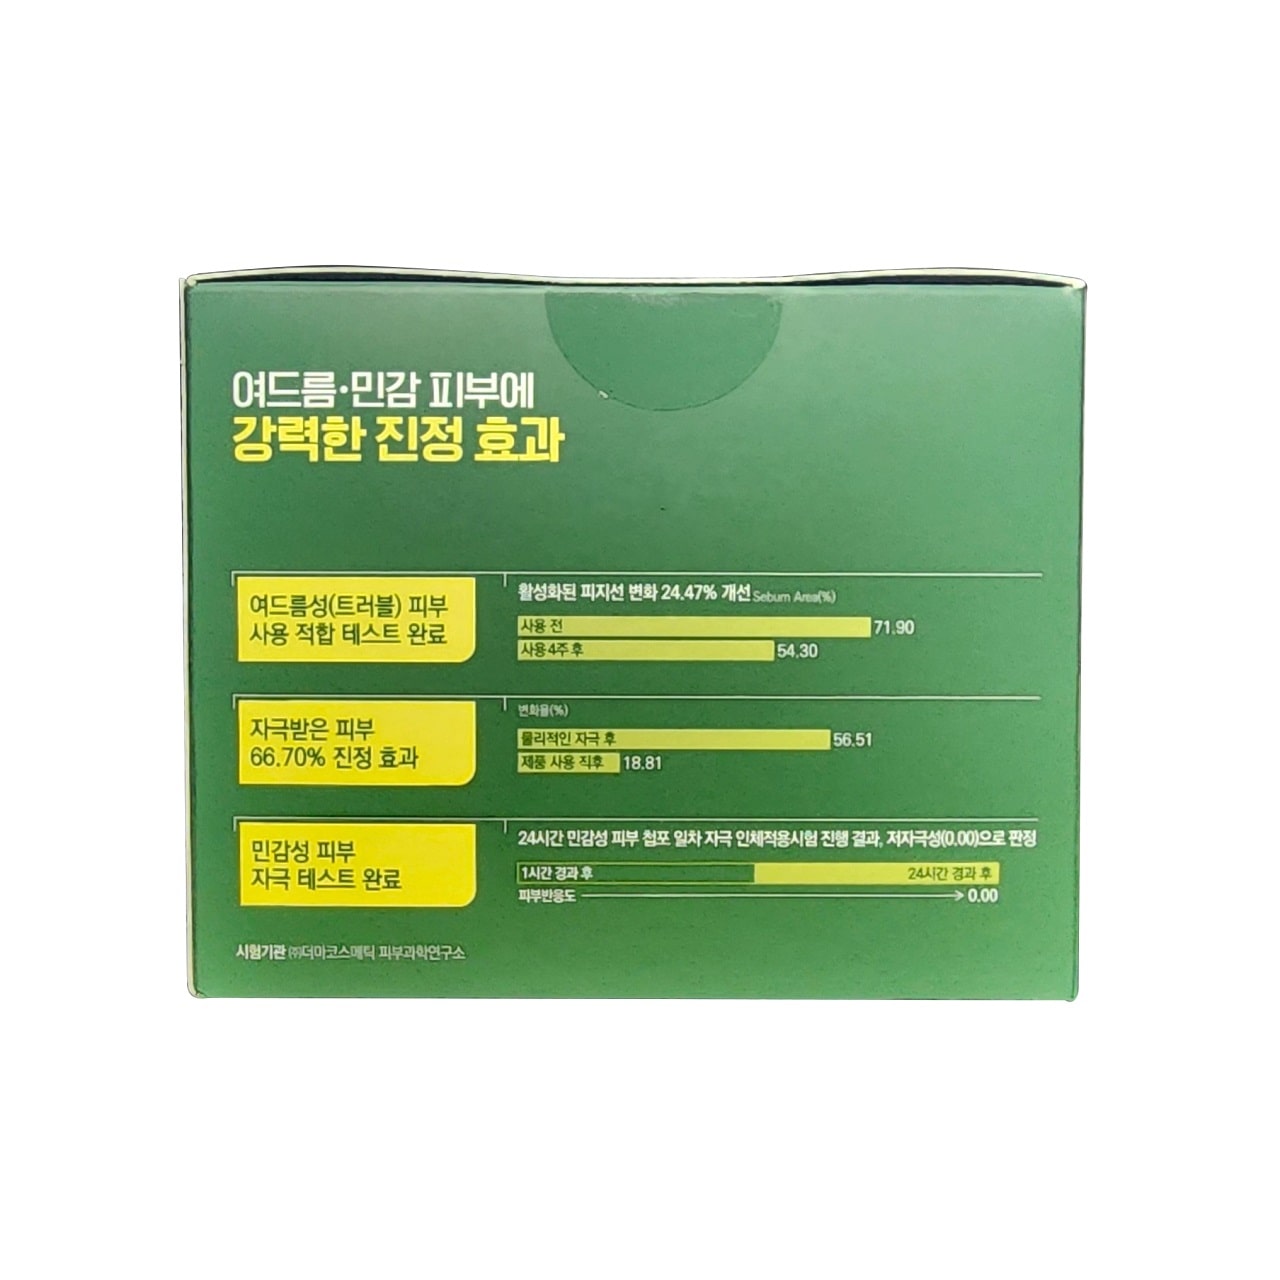 Features for Mediheal Teatree Trouble Pad (100 count)